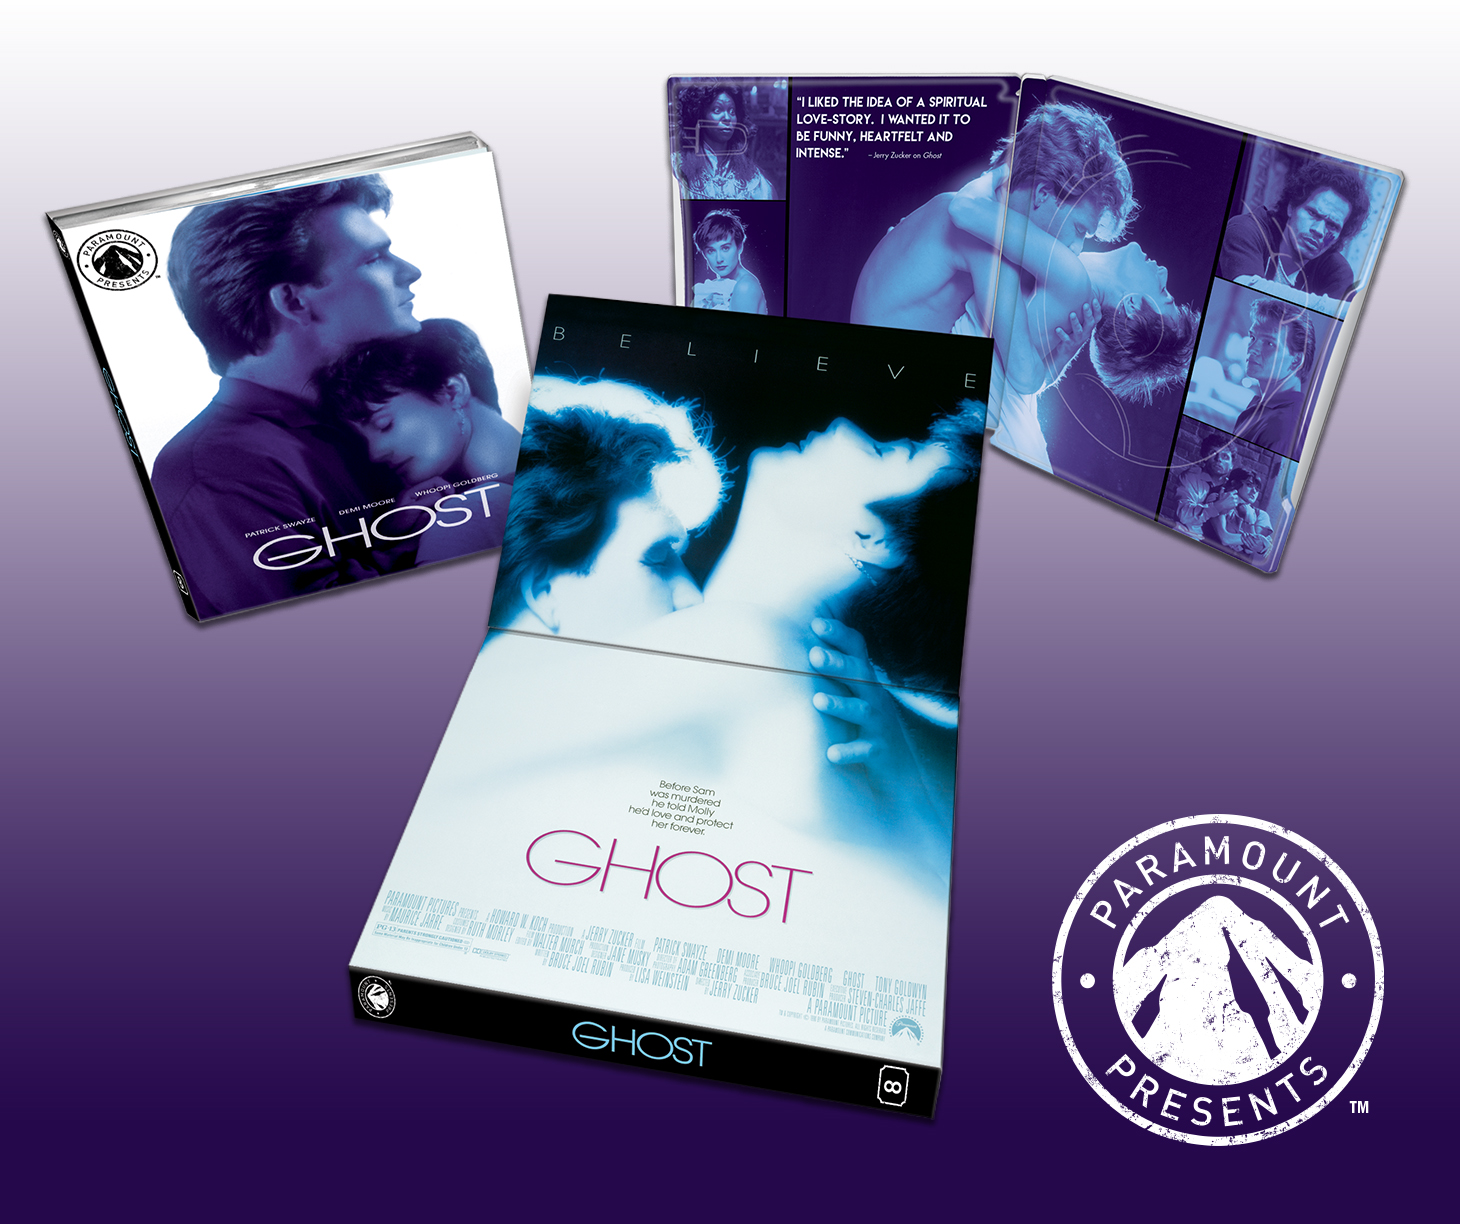 Paramount Presents: Ghost [Blu-ray]